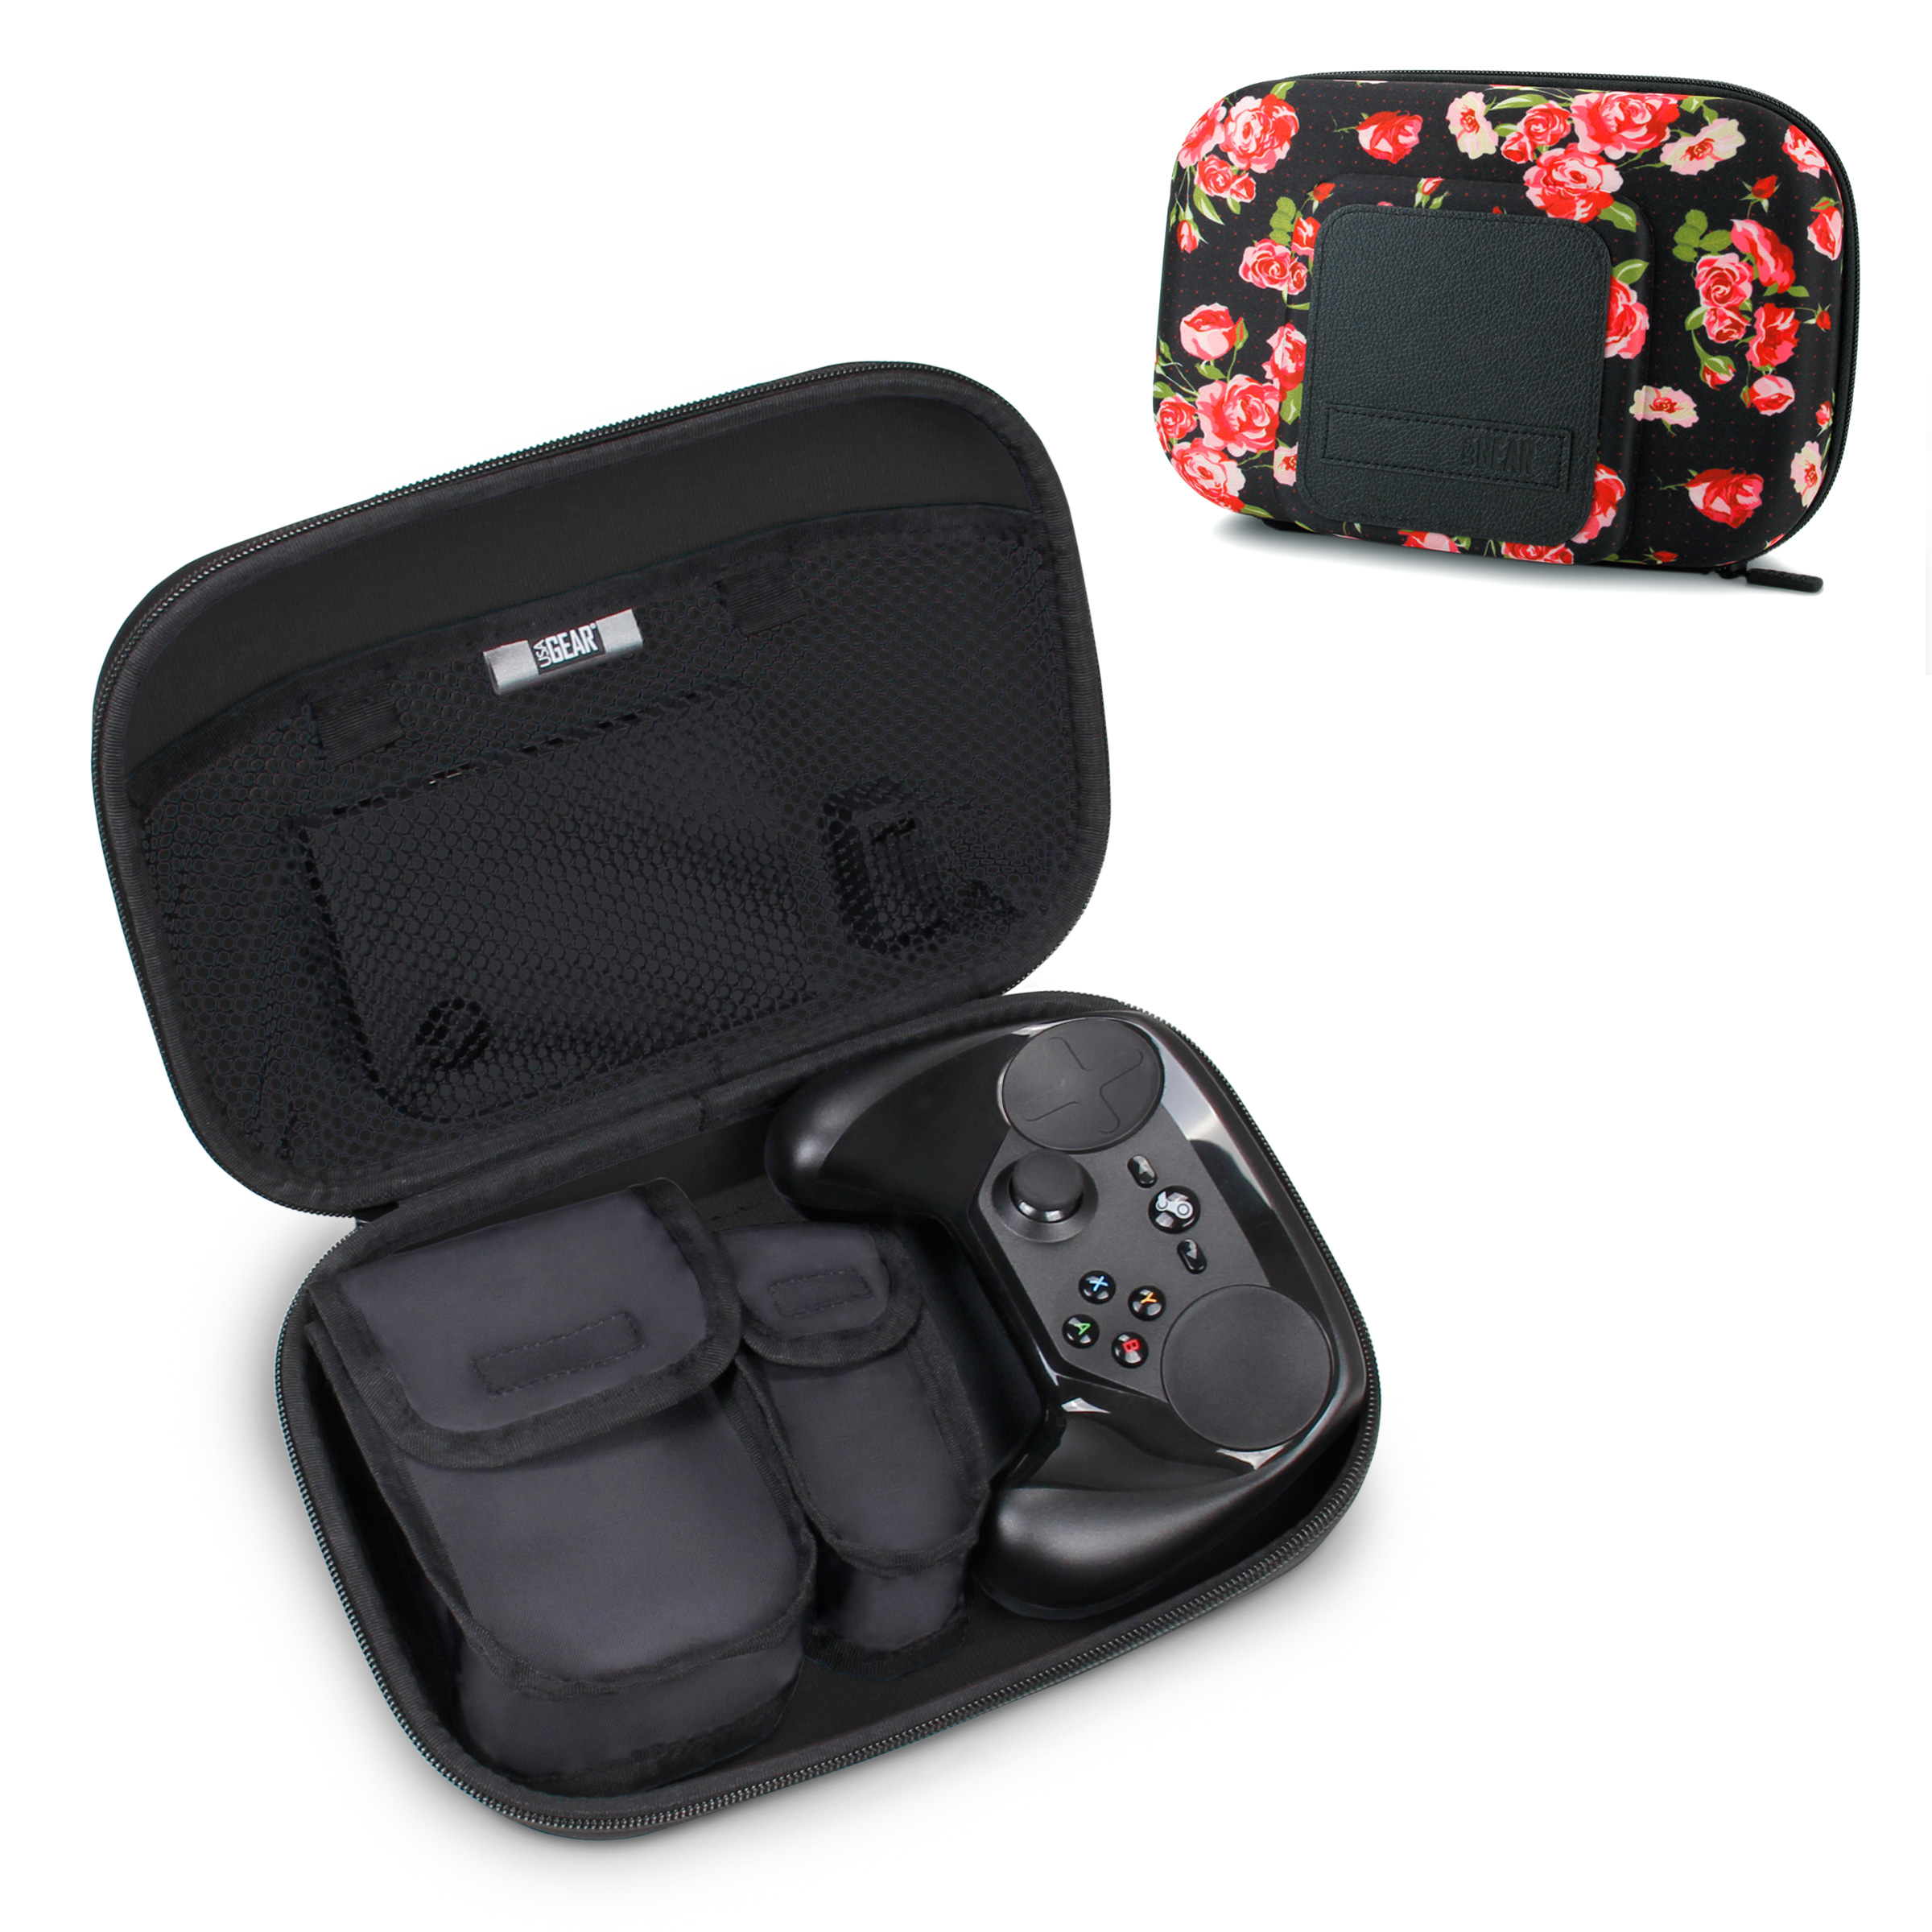 Hard Shell Steam Link And Steam Controller Travel Case By Usa Gear Ebay